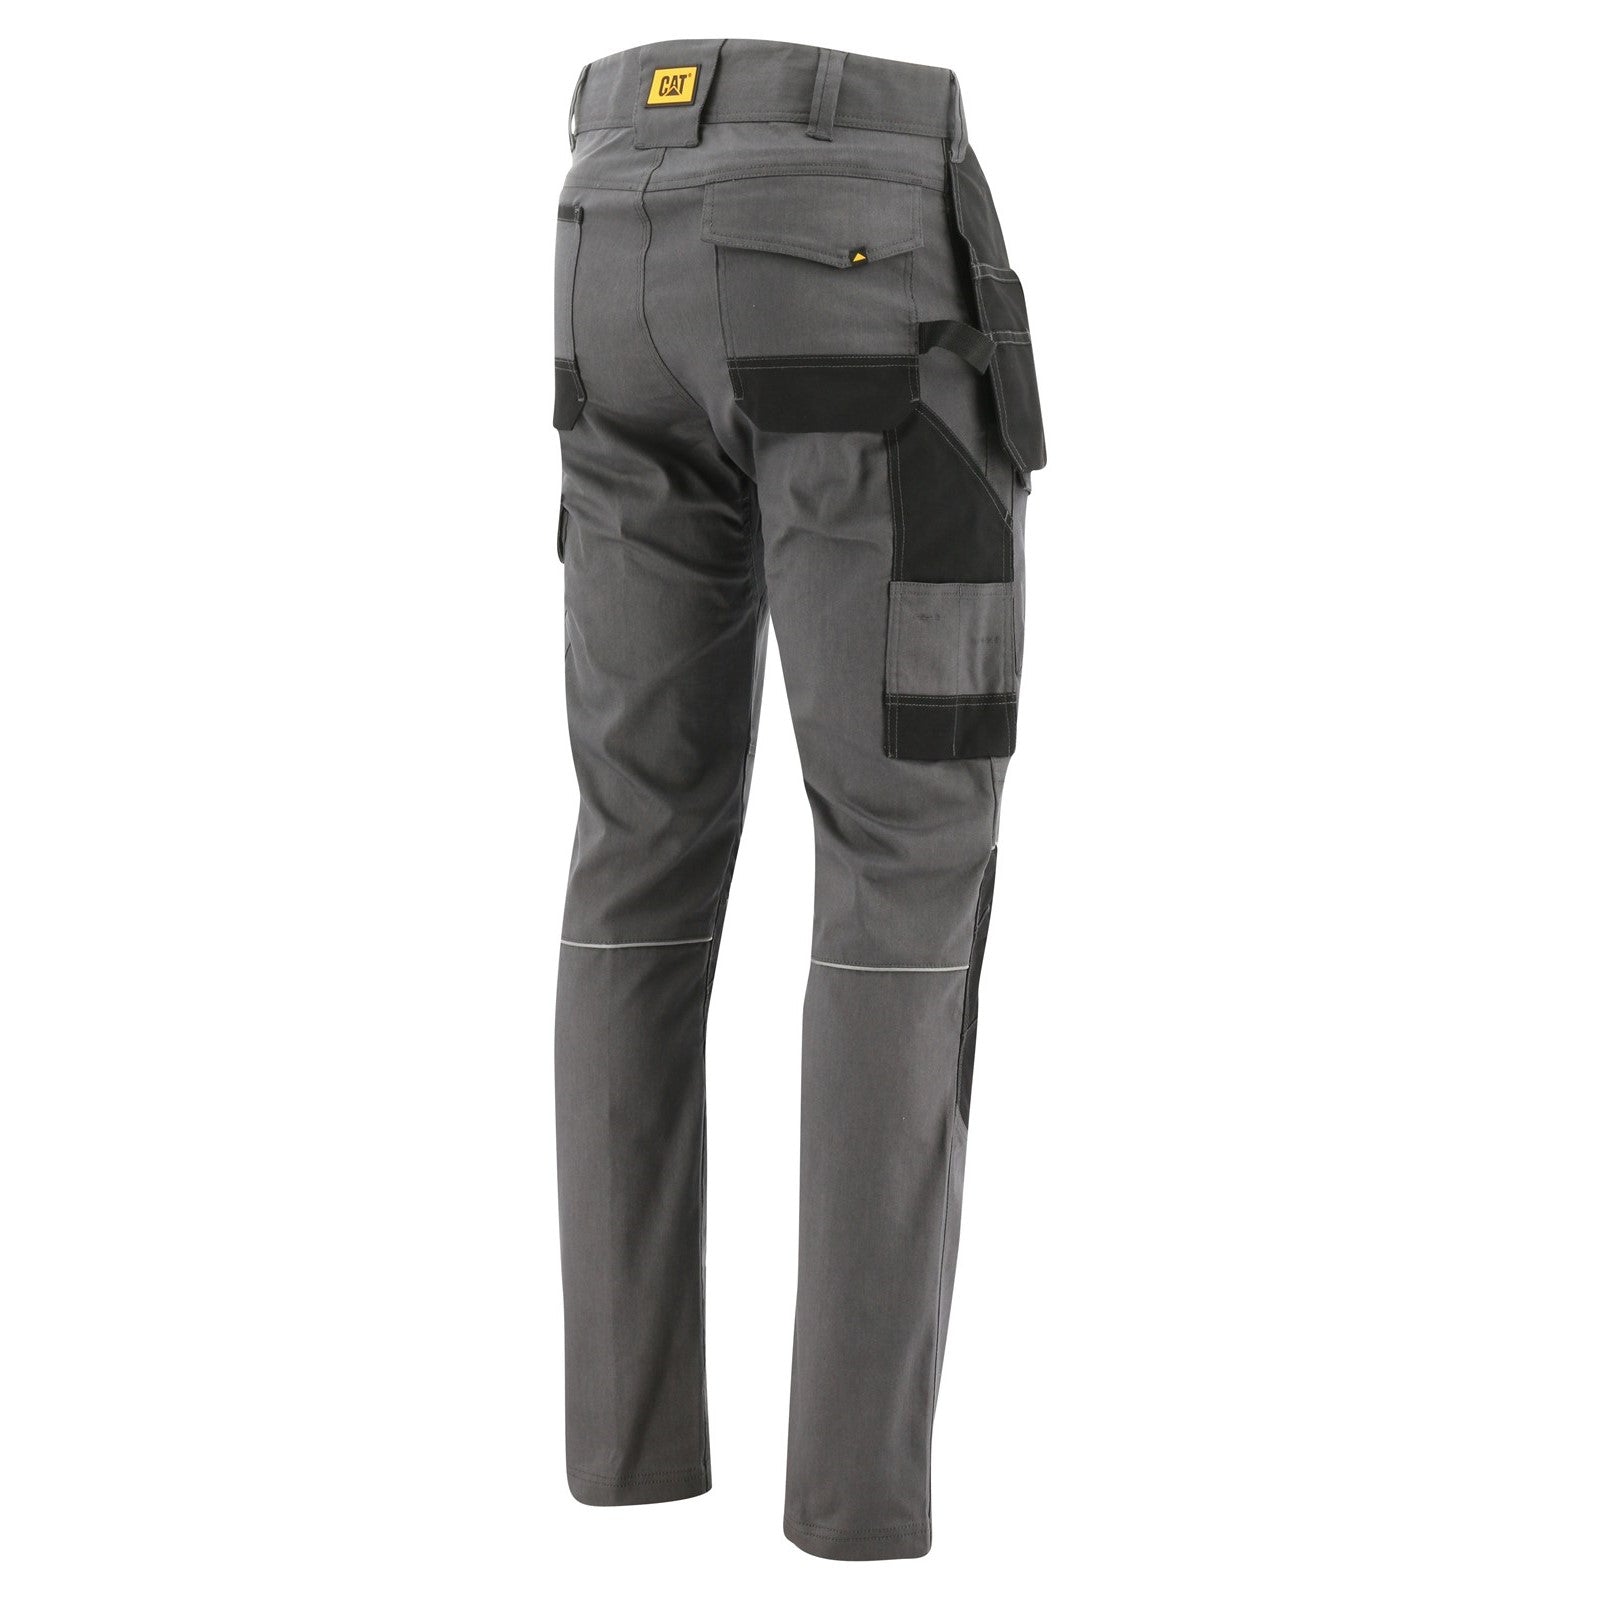 Caterpillar Workwear  Construction Workwear for Men and Women  Northern  Boots